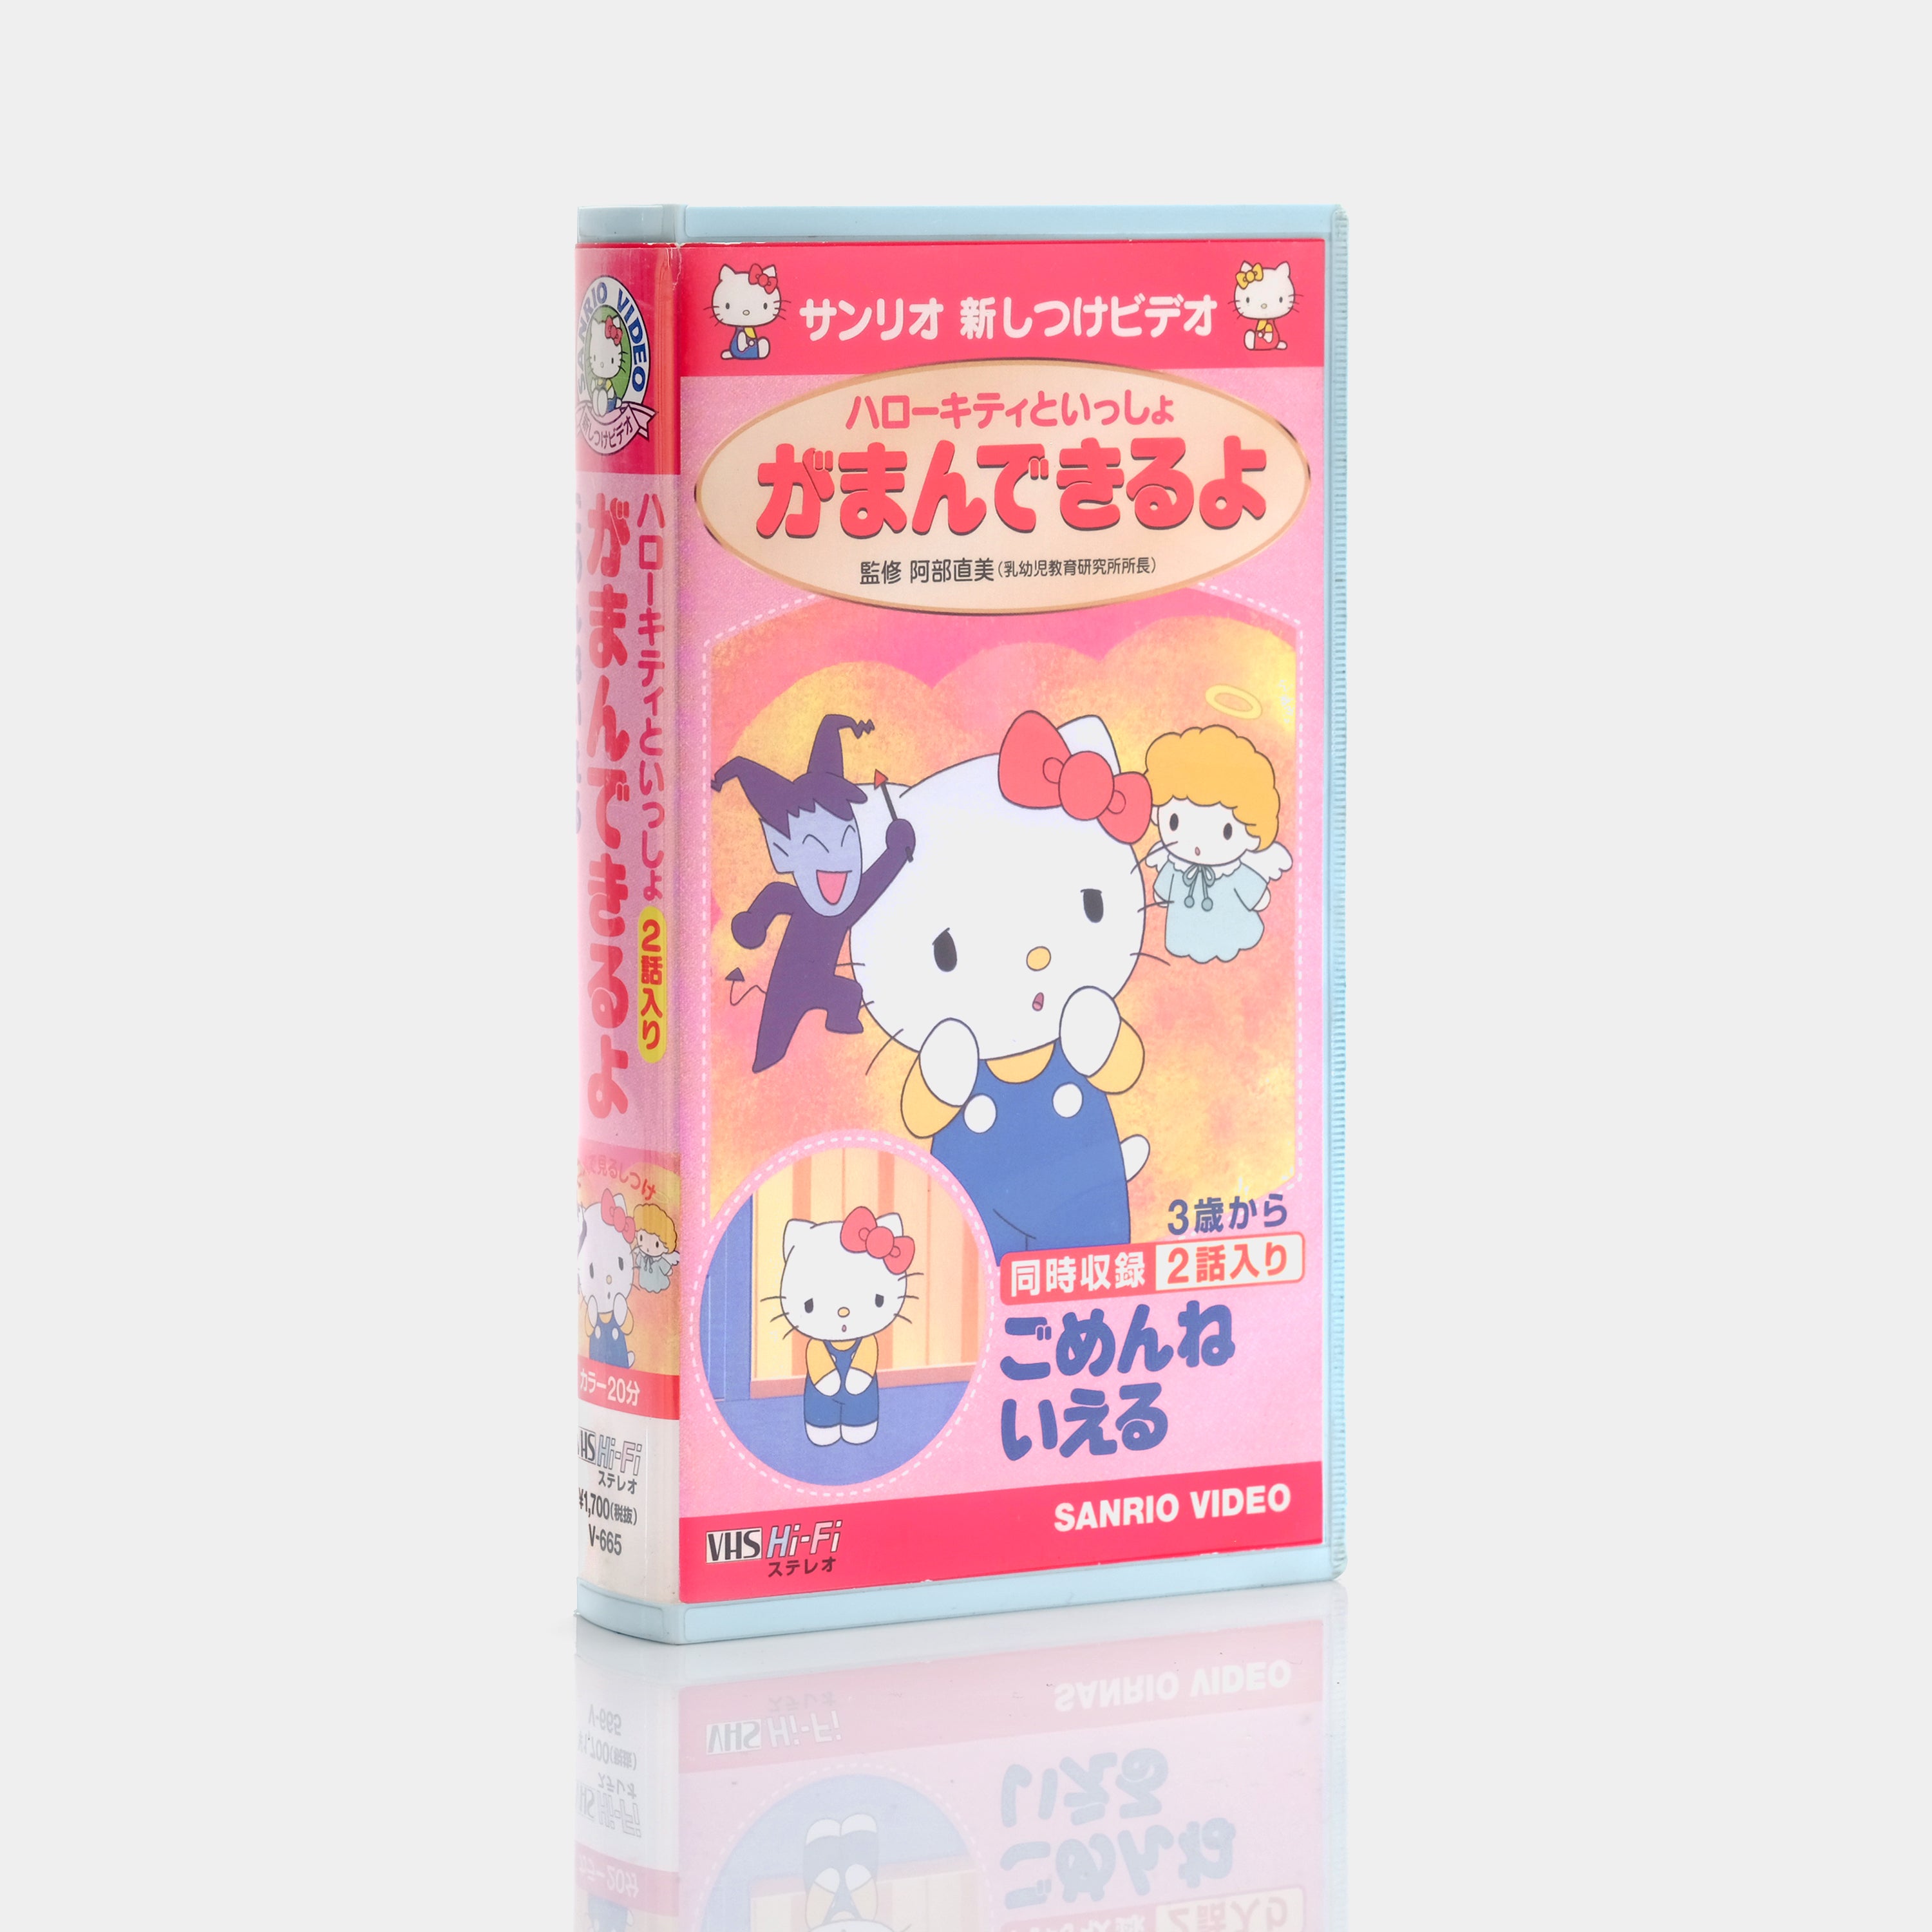 Sanrio Training Video: I Can Endure With Hello Kitty VHS Tape